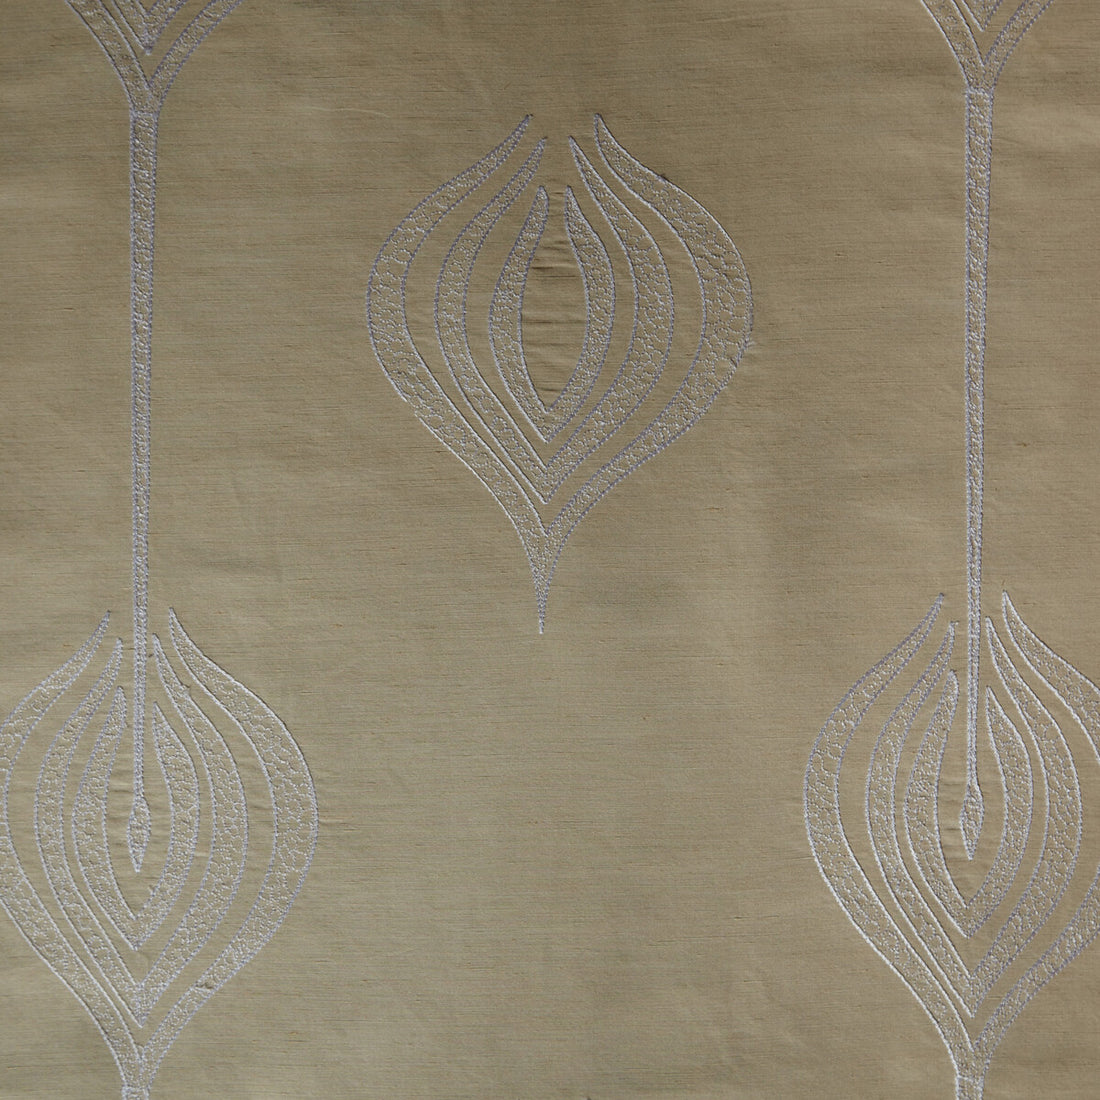 Tulip Embroidery fabric in cream color - pattern GWF-2928.16.0 - by Lee Jofa Modern in the Allegra Hicks II collection